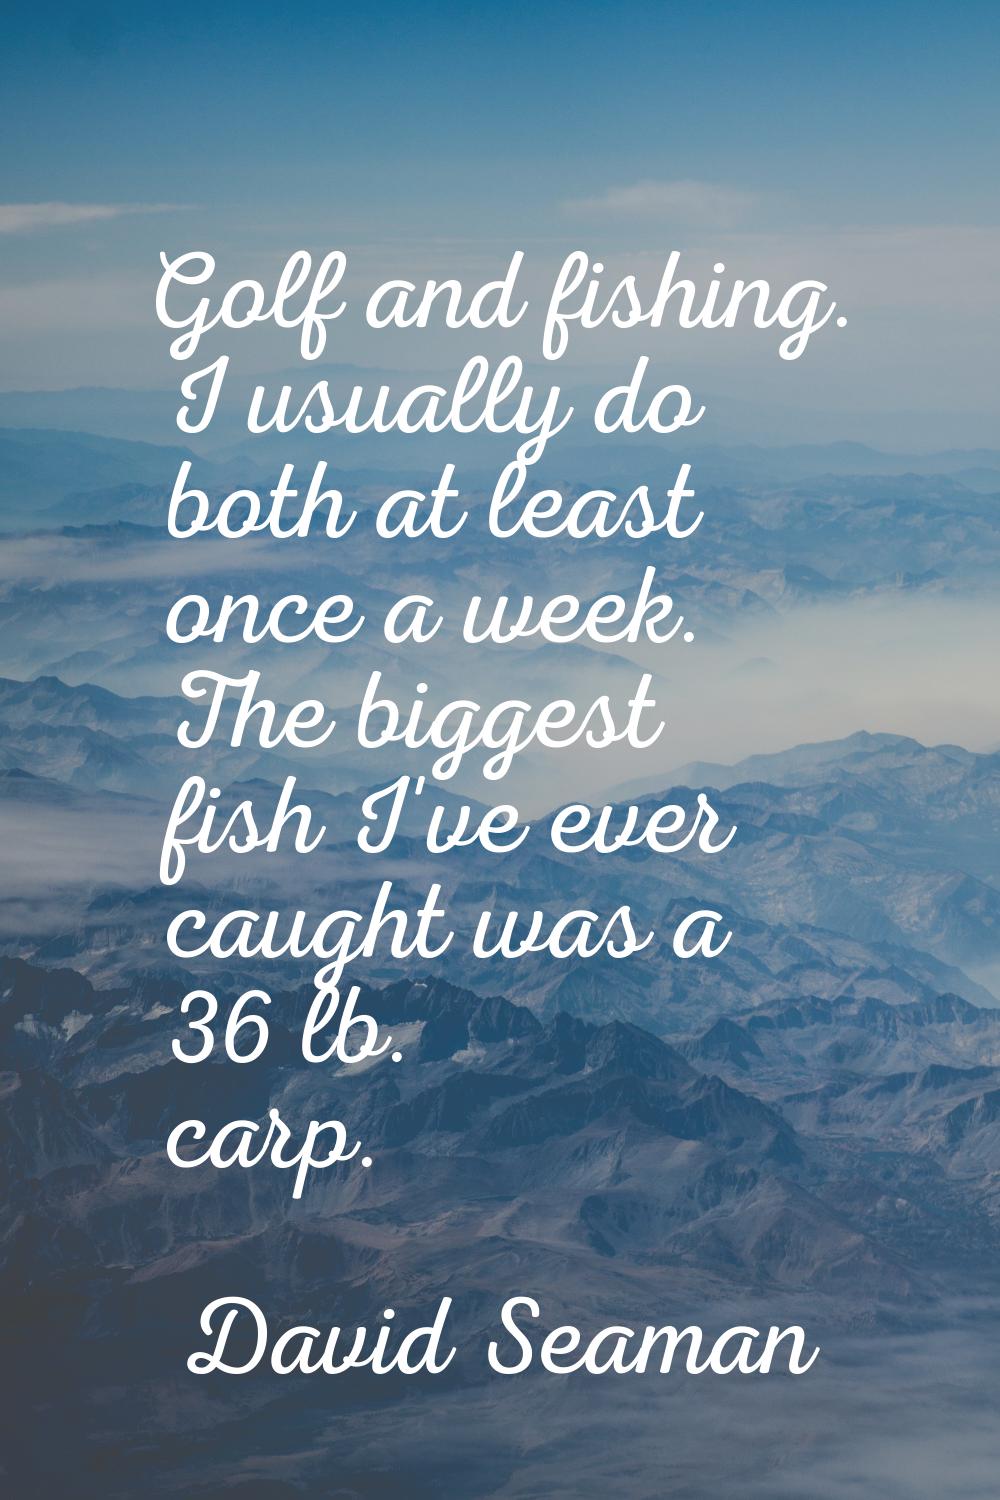 Golf and fishing. I usually do both at least once a week. The biggest fish I've ever caught was a 3